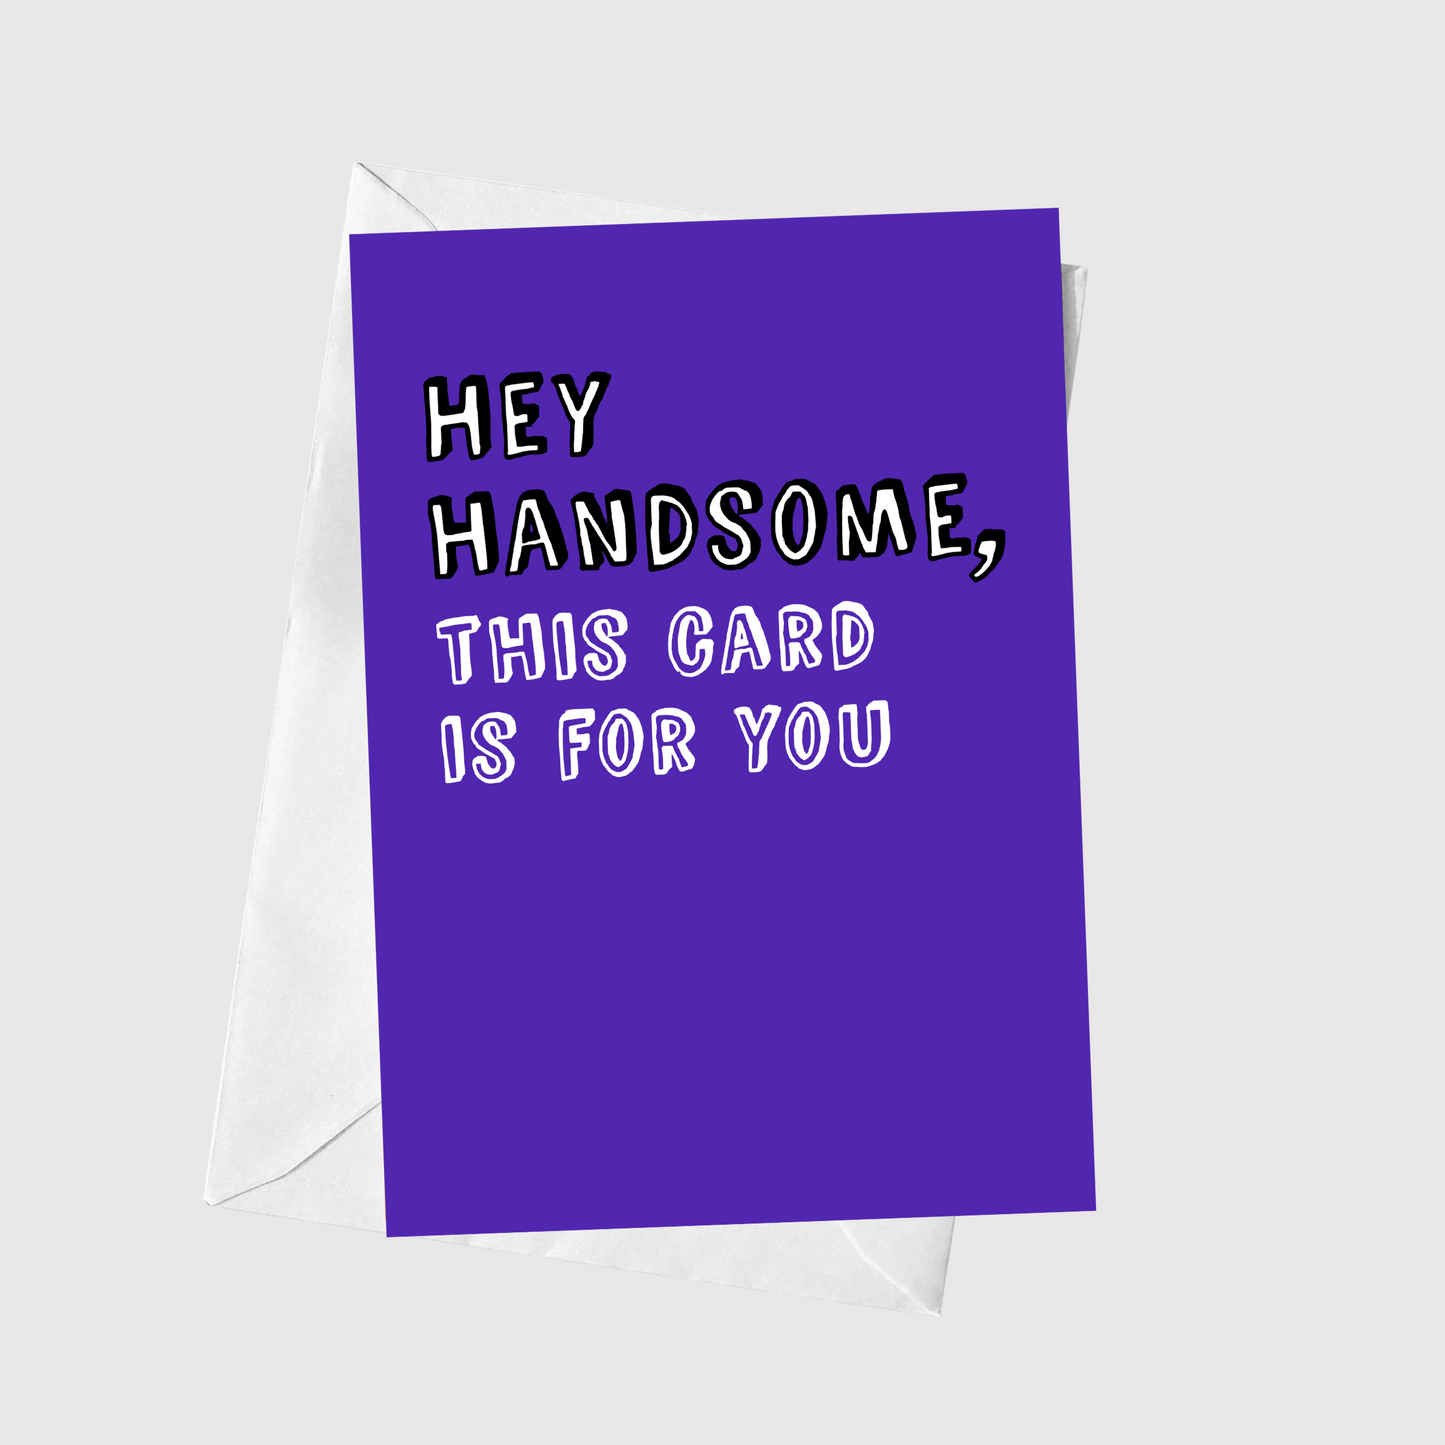 Hey Handsome, This Card Is For You